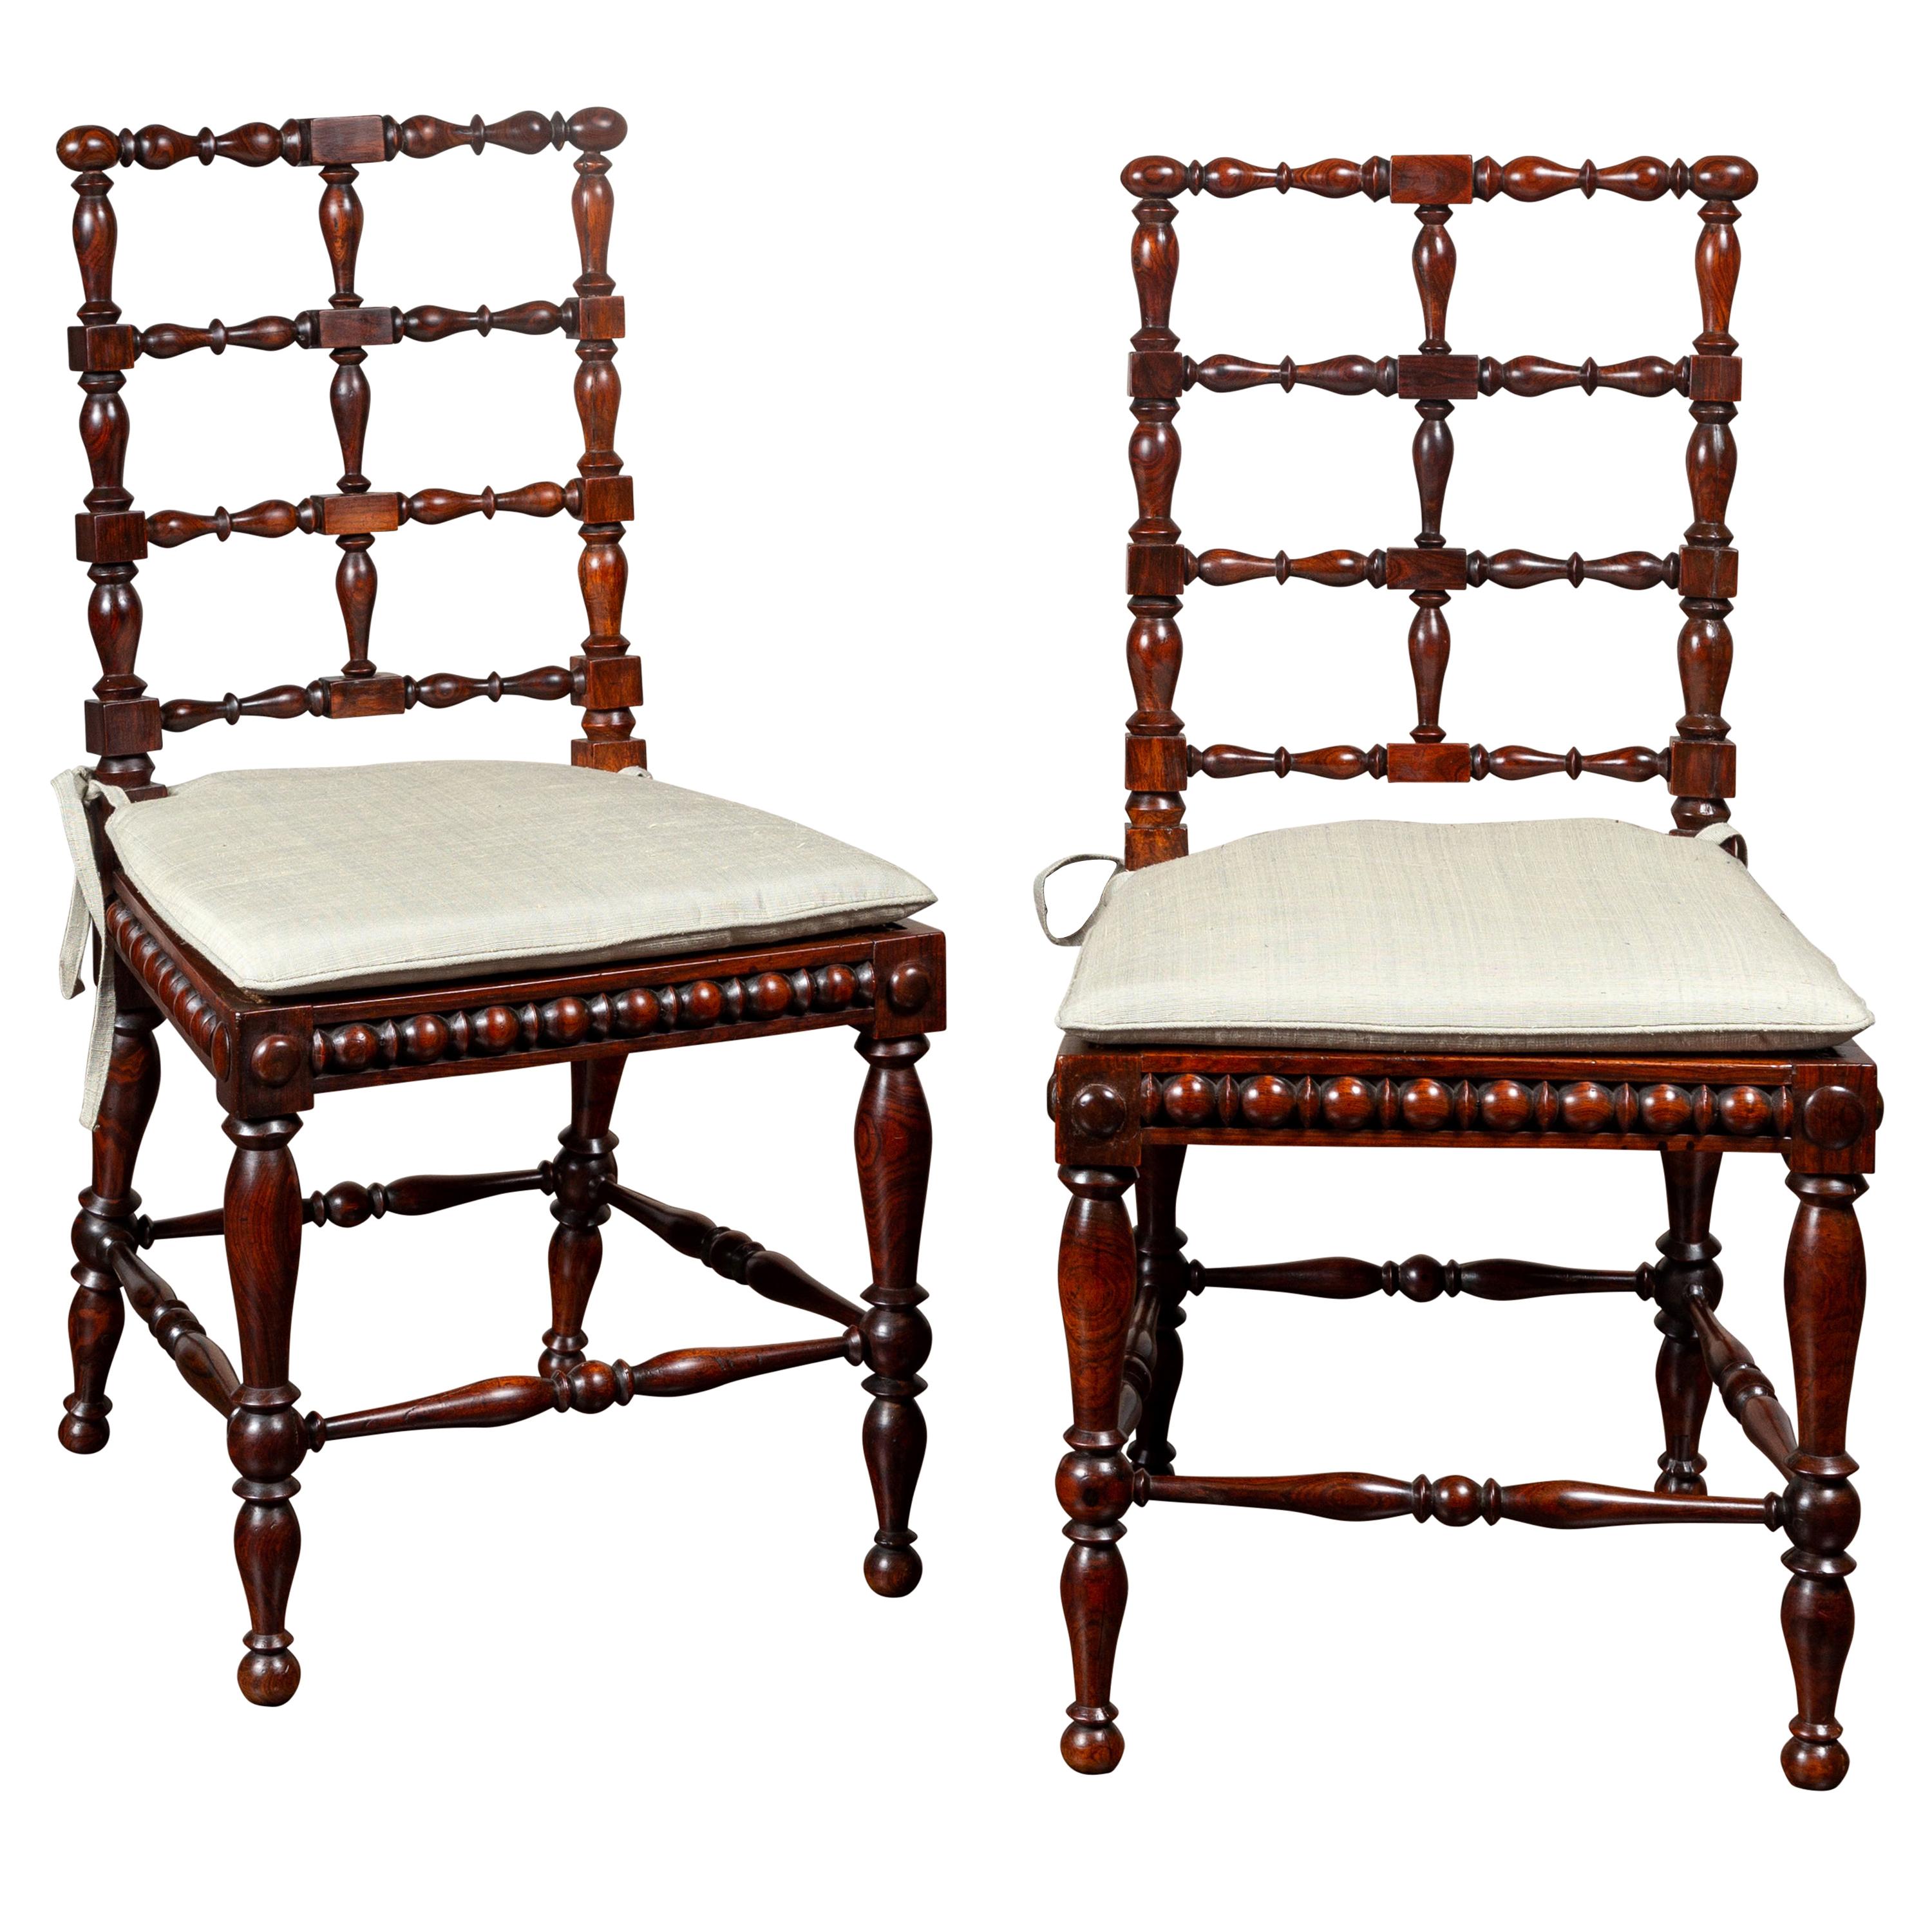 Pair of English 1870s Rosewood Side Chairs with Cane Seats and Turned Spindles